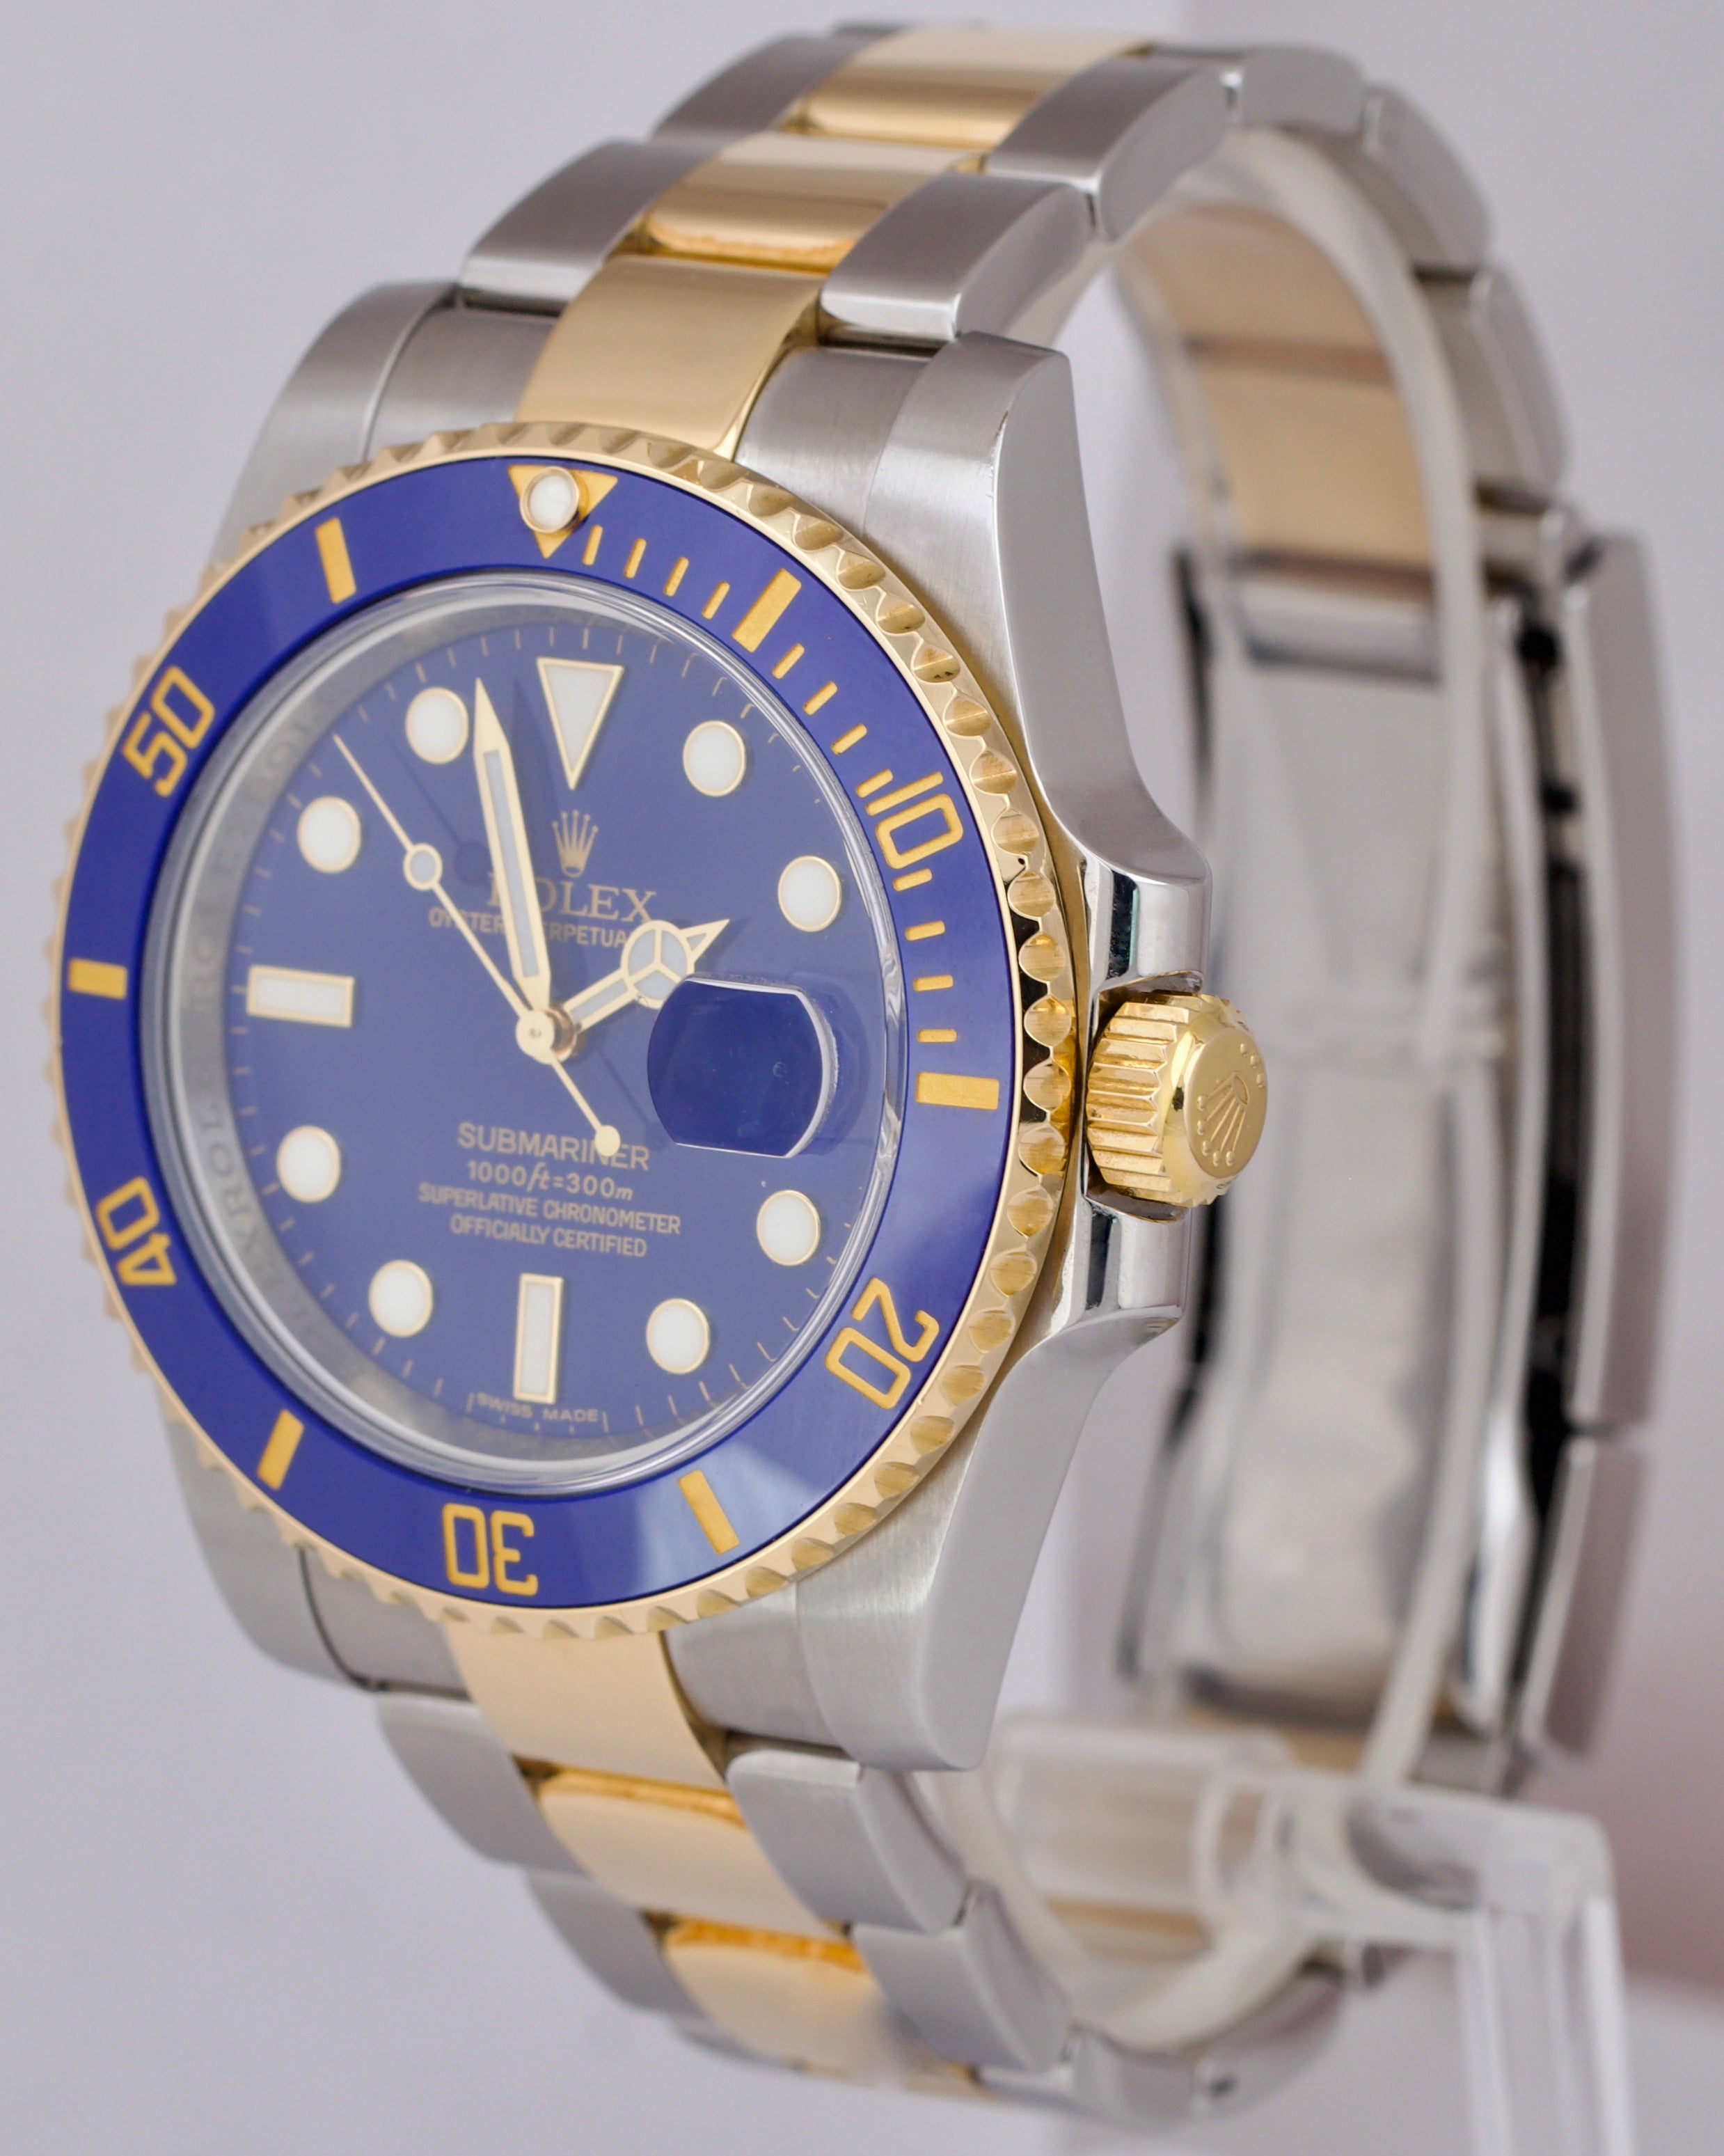 Rolex Submariner Date Ceramic Two-Tone Gold Steel Blue Automatic Watch 116613 LB